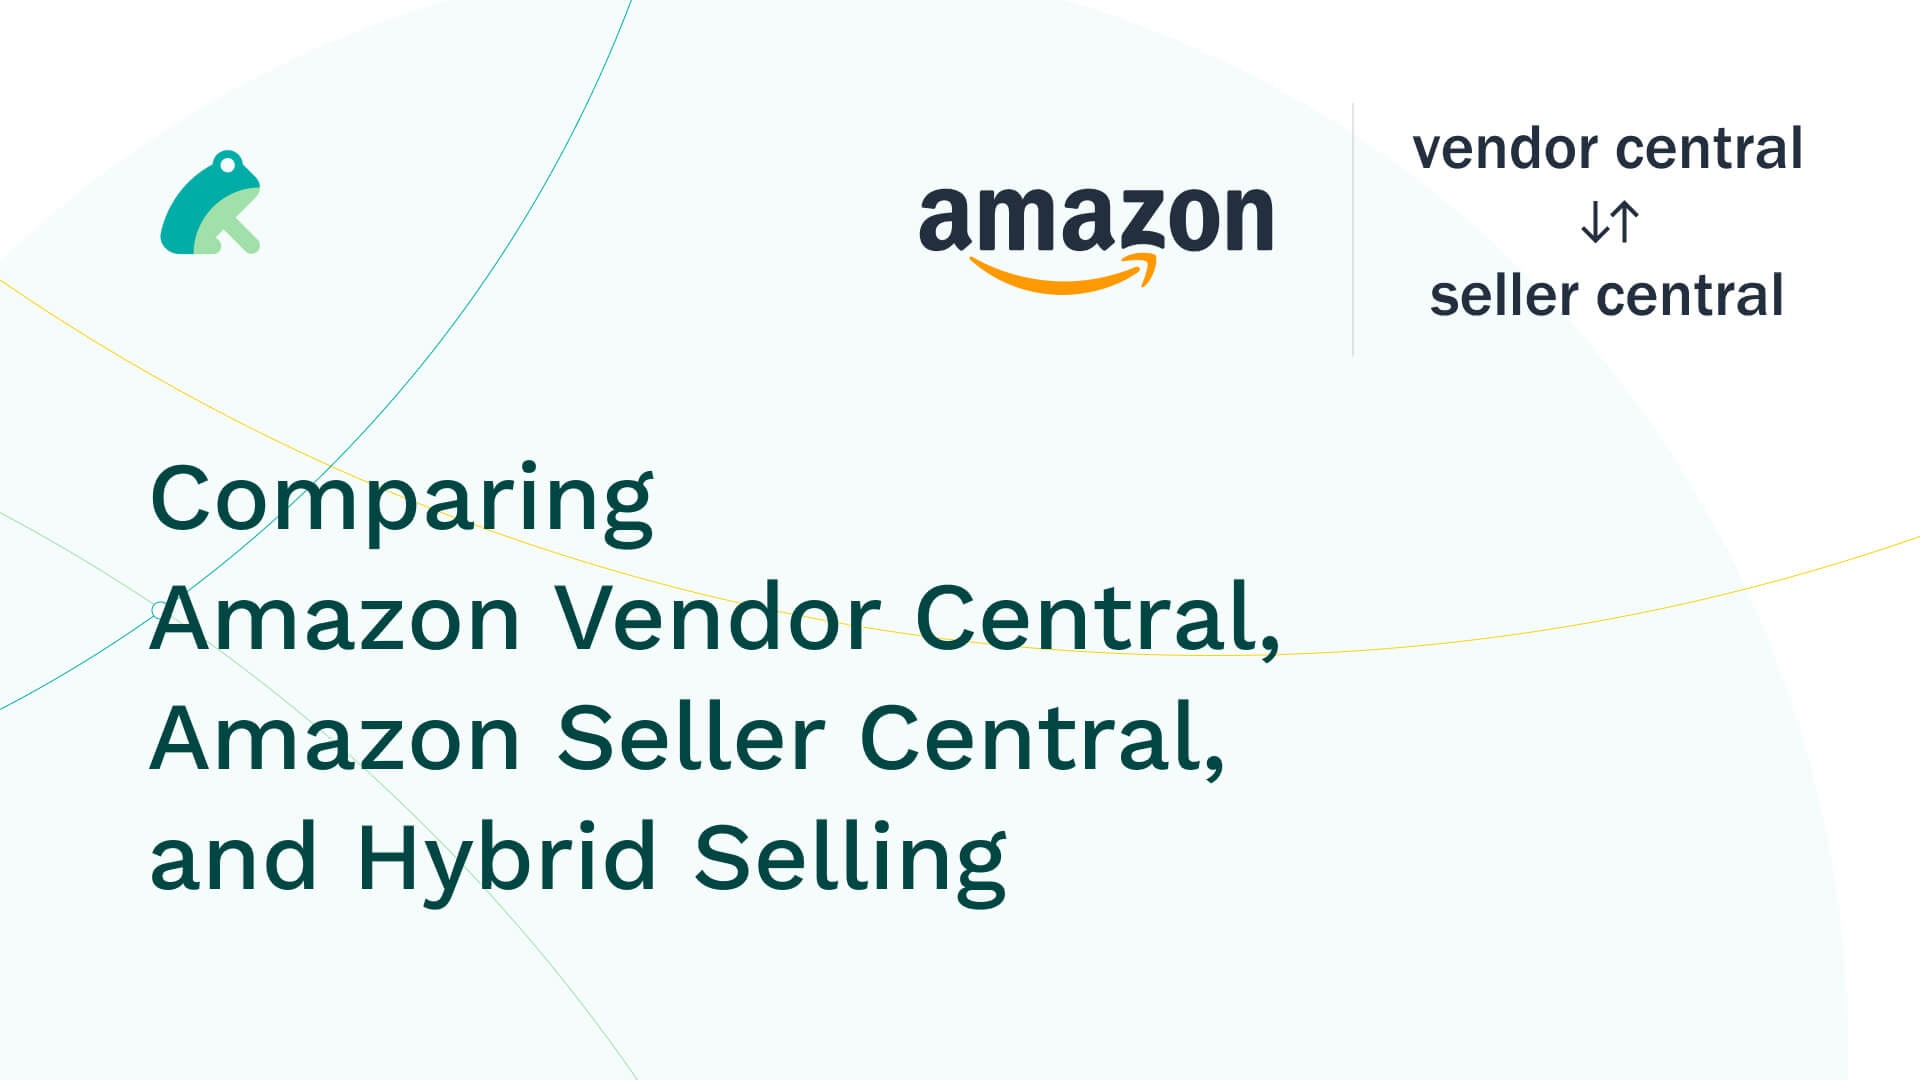 Comparing Amazon Vendor Central, Amazon Seller Central, and Hybrid Selling